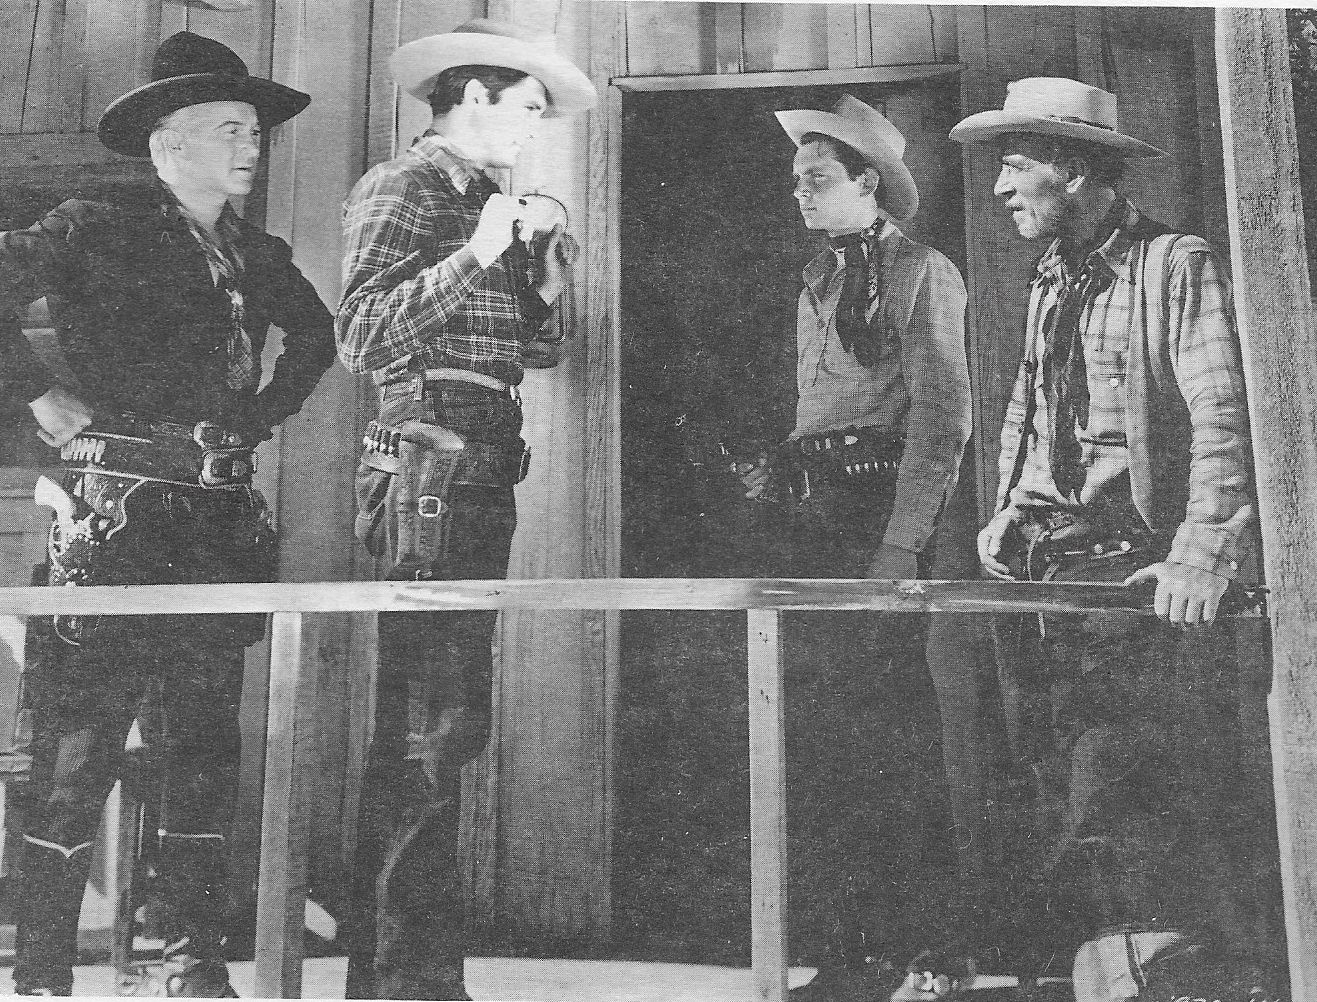 George Reeves, William Boyd, Andy Clyde, and Jay Kirby in Hoppy Serves a Writ (1943)